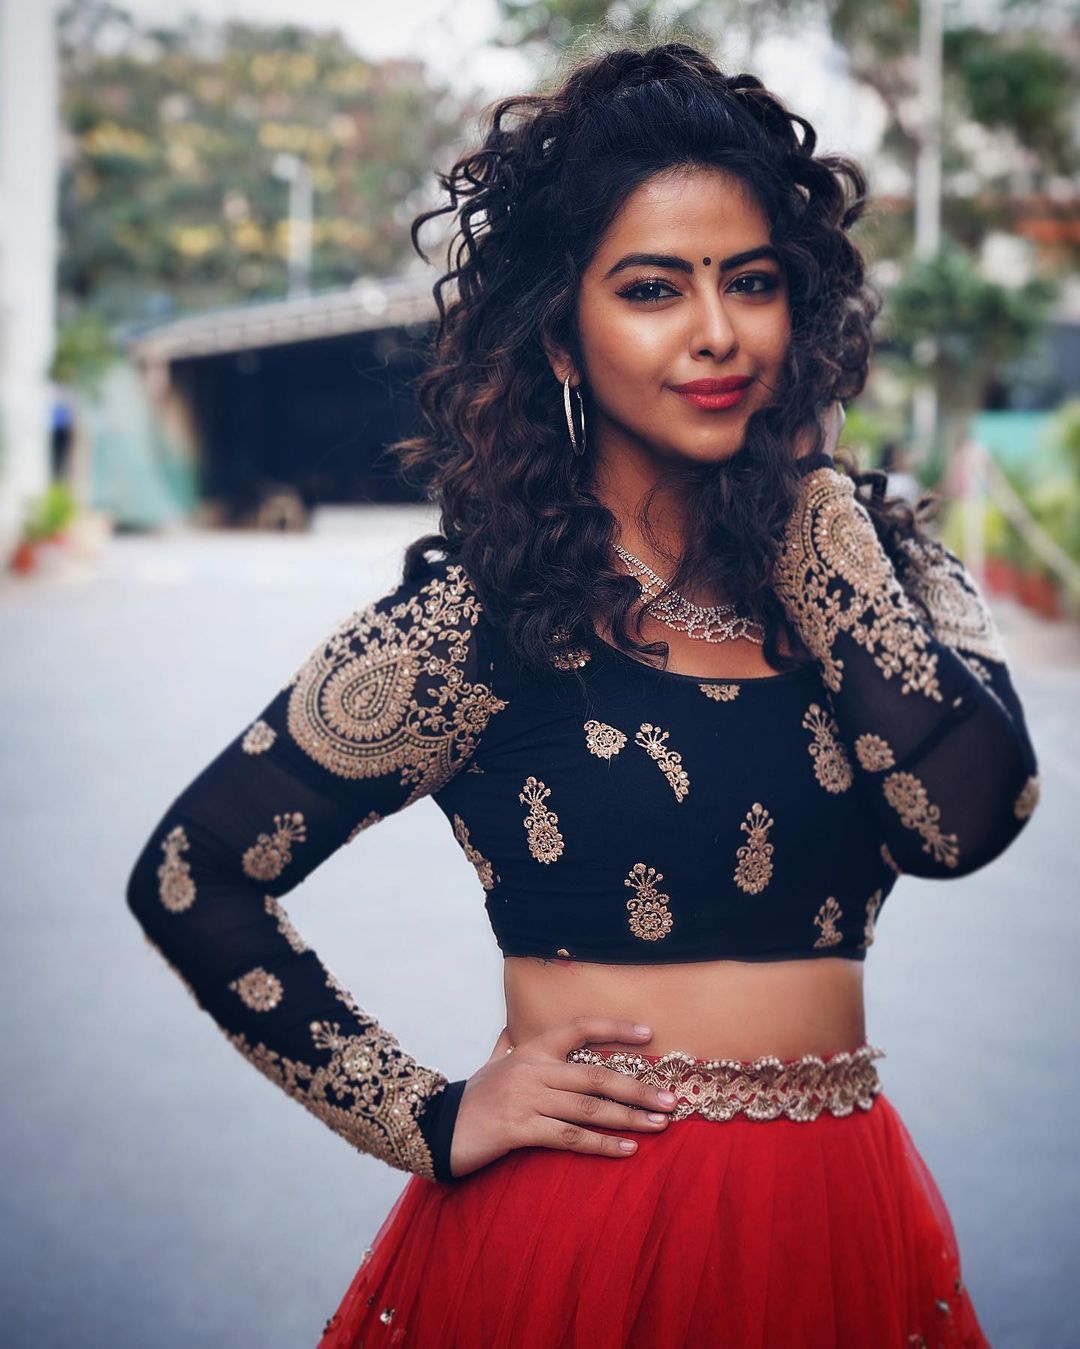 Avika Gor Broke Down Because Didn't Think She Looked Good: Got So Busy Judging Myself, Didn't Leave Scope For Outsiders